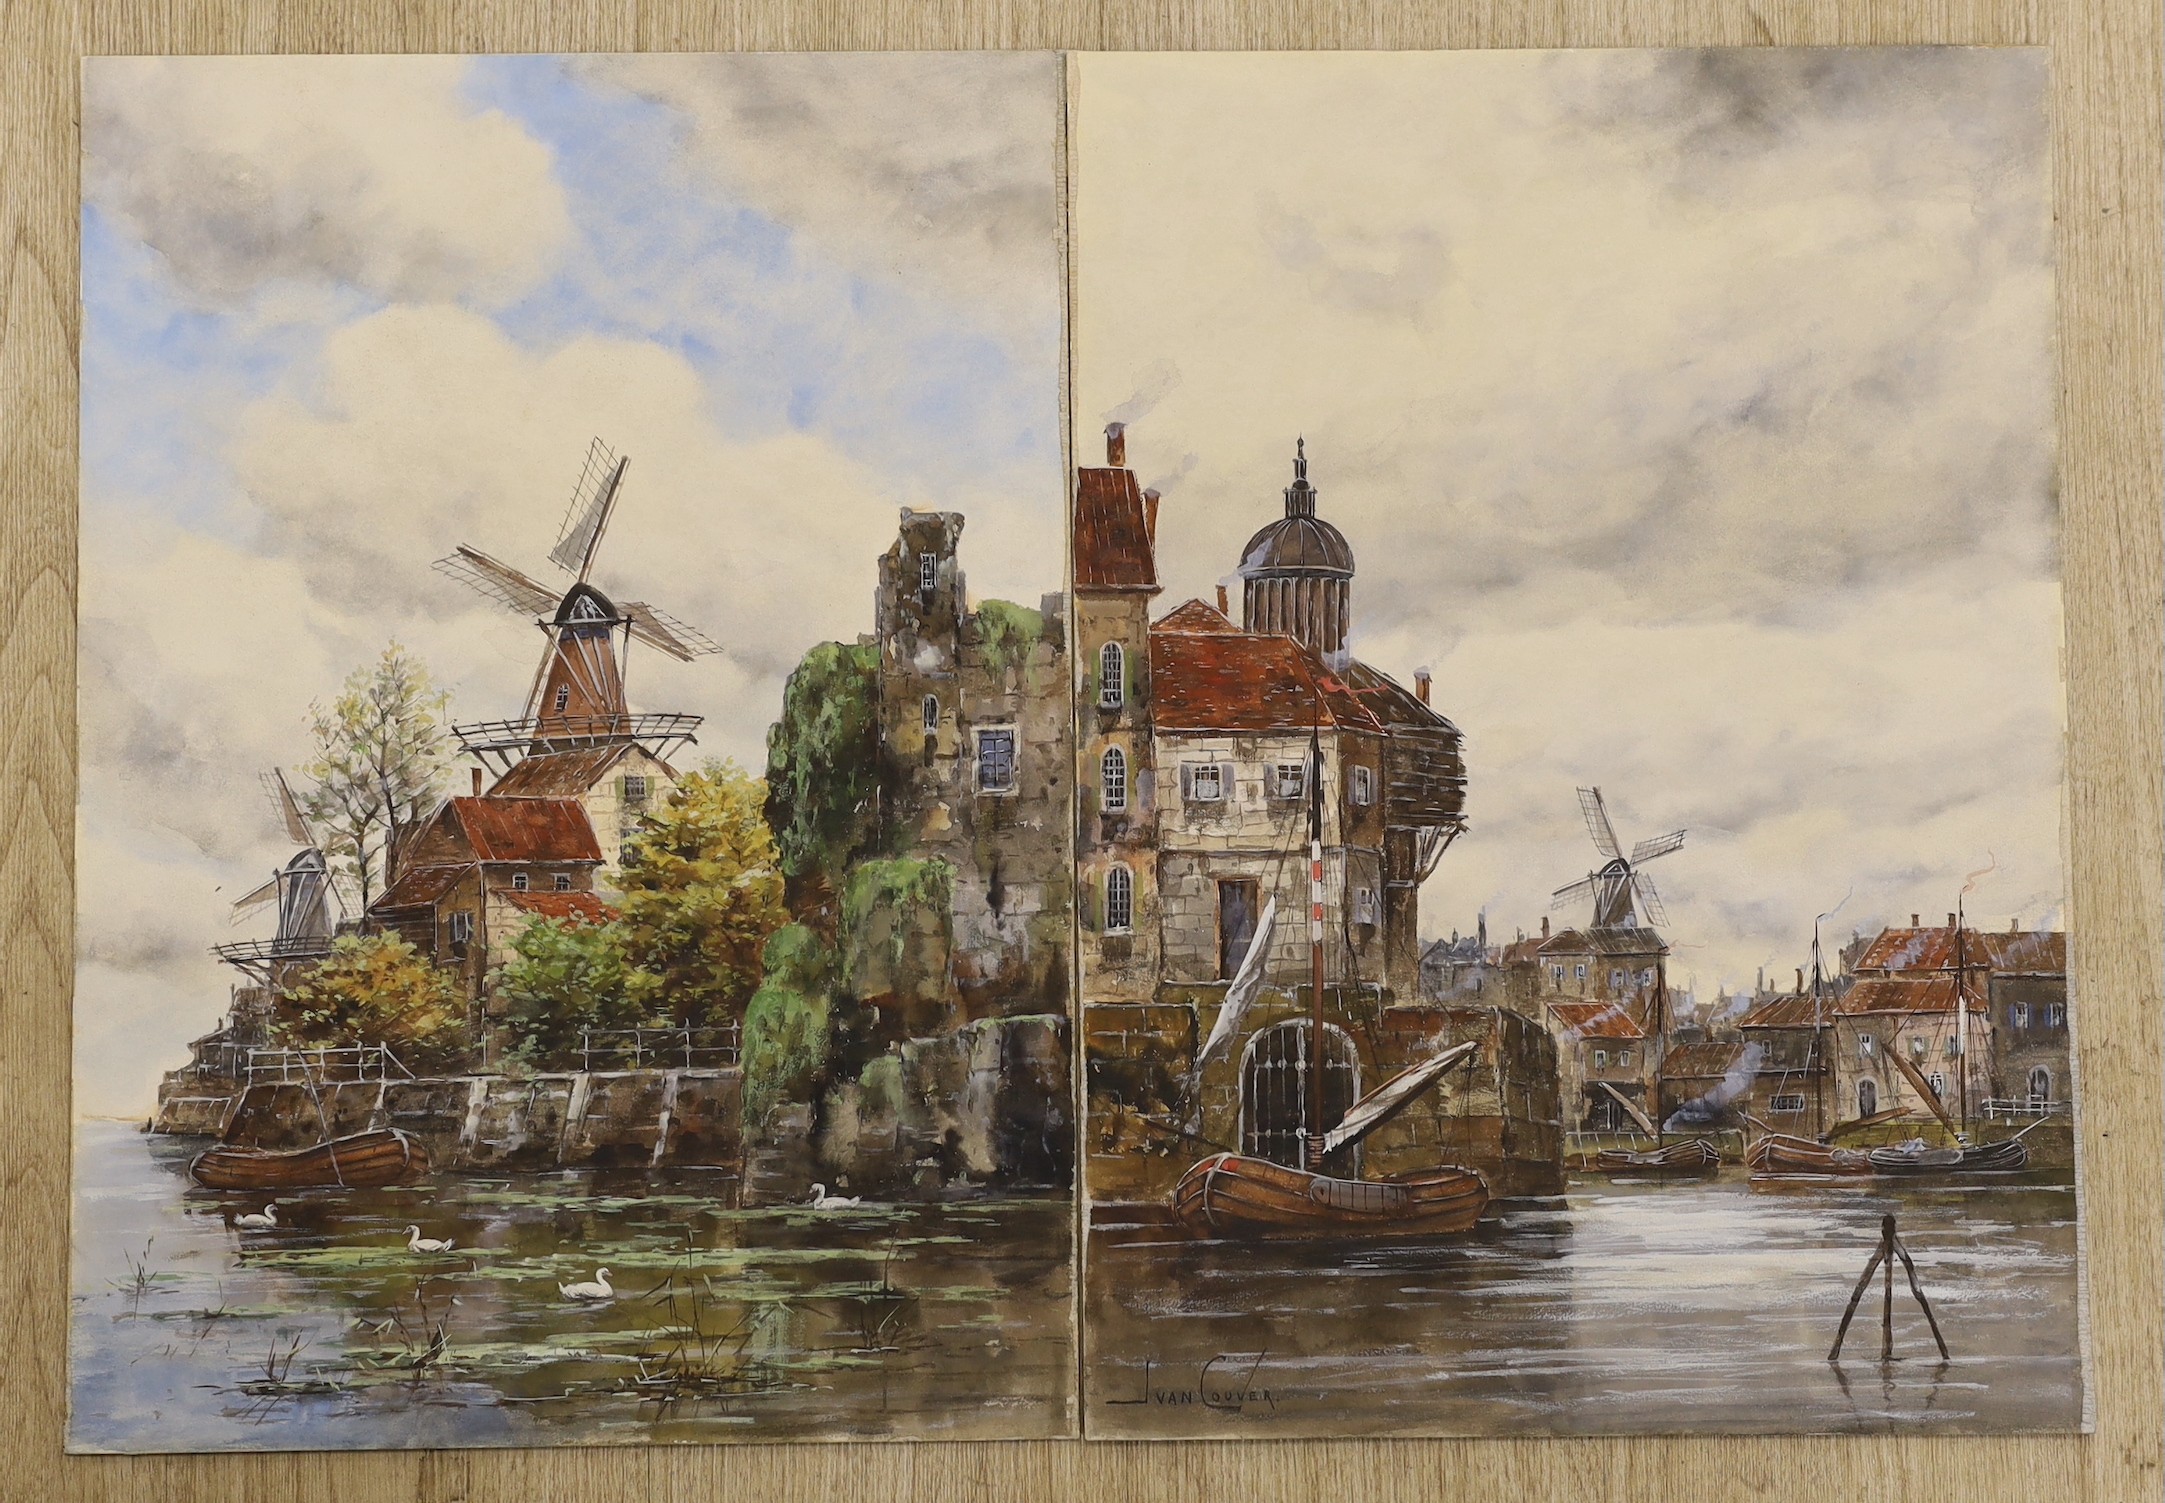 Jan Van Couver (1836-1909), oil on board, topographical view of Dutch canal town, signed, 53 x 38cm, together with a Johannes Hermanus Koekkoek (1778-1851), oil on board, Windmill by a canal, both 53 x 38cm